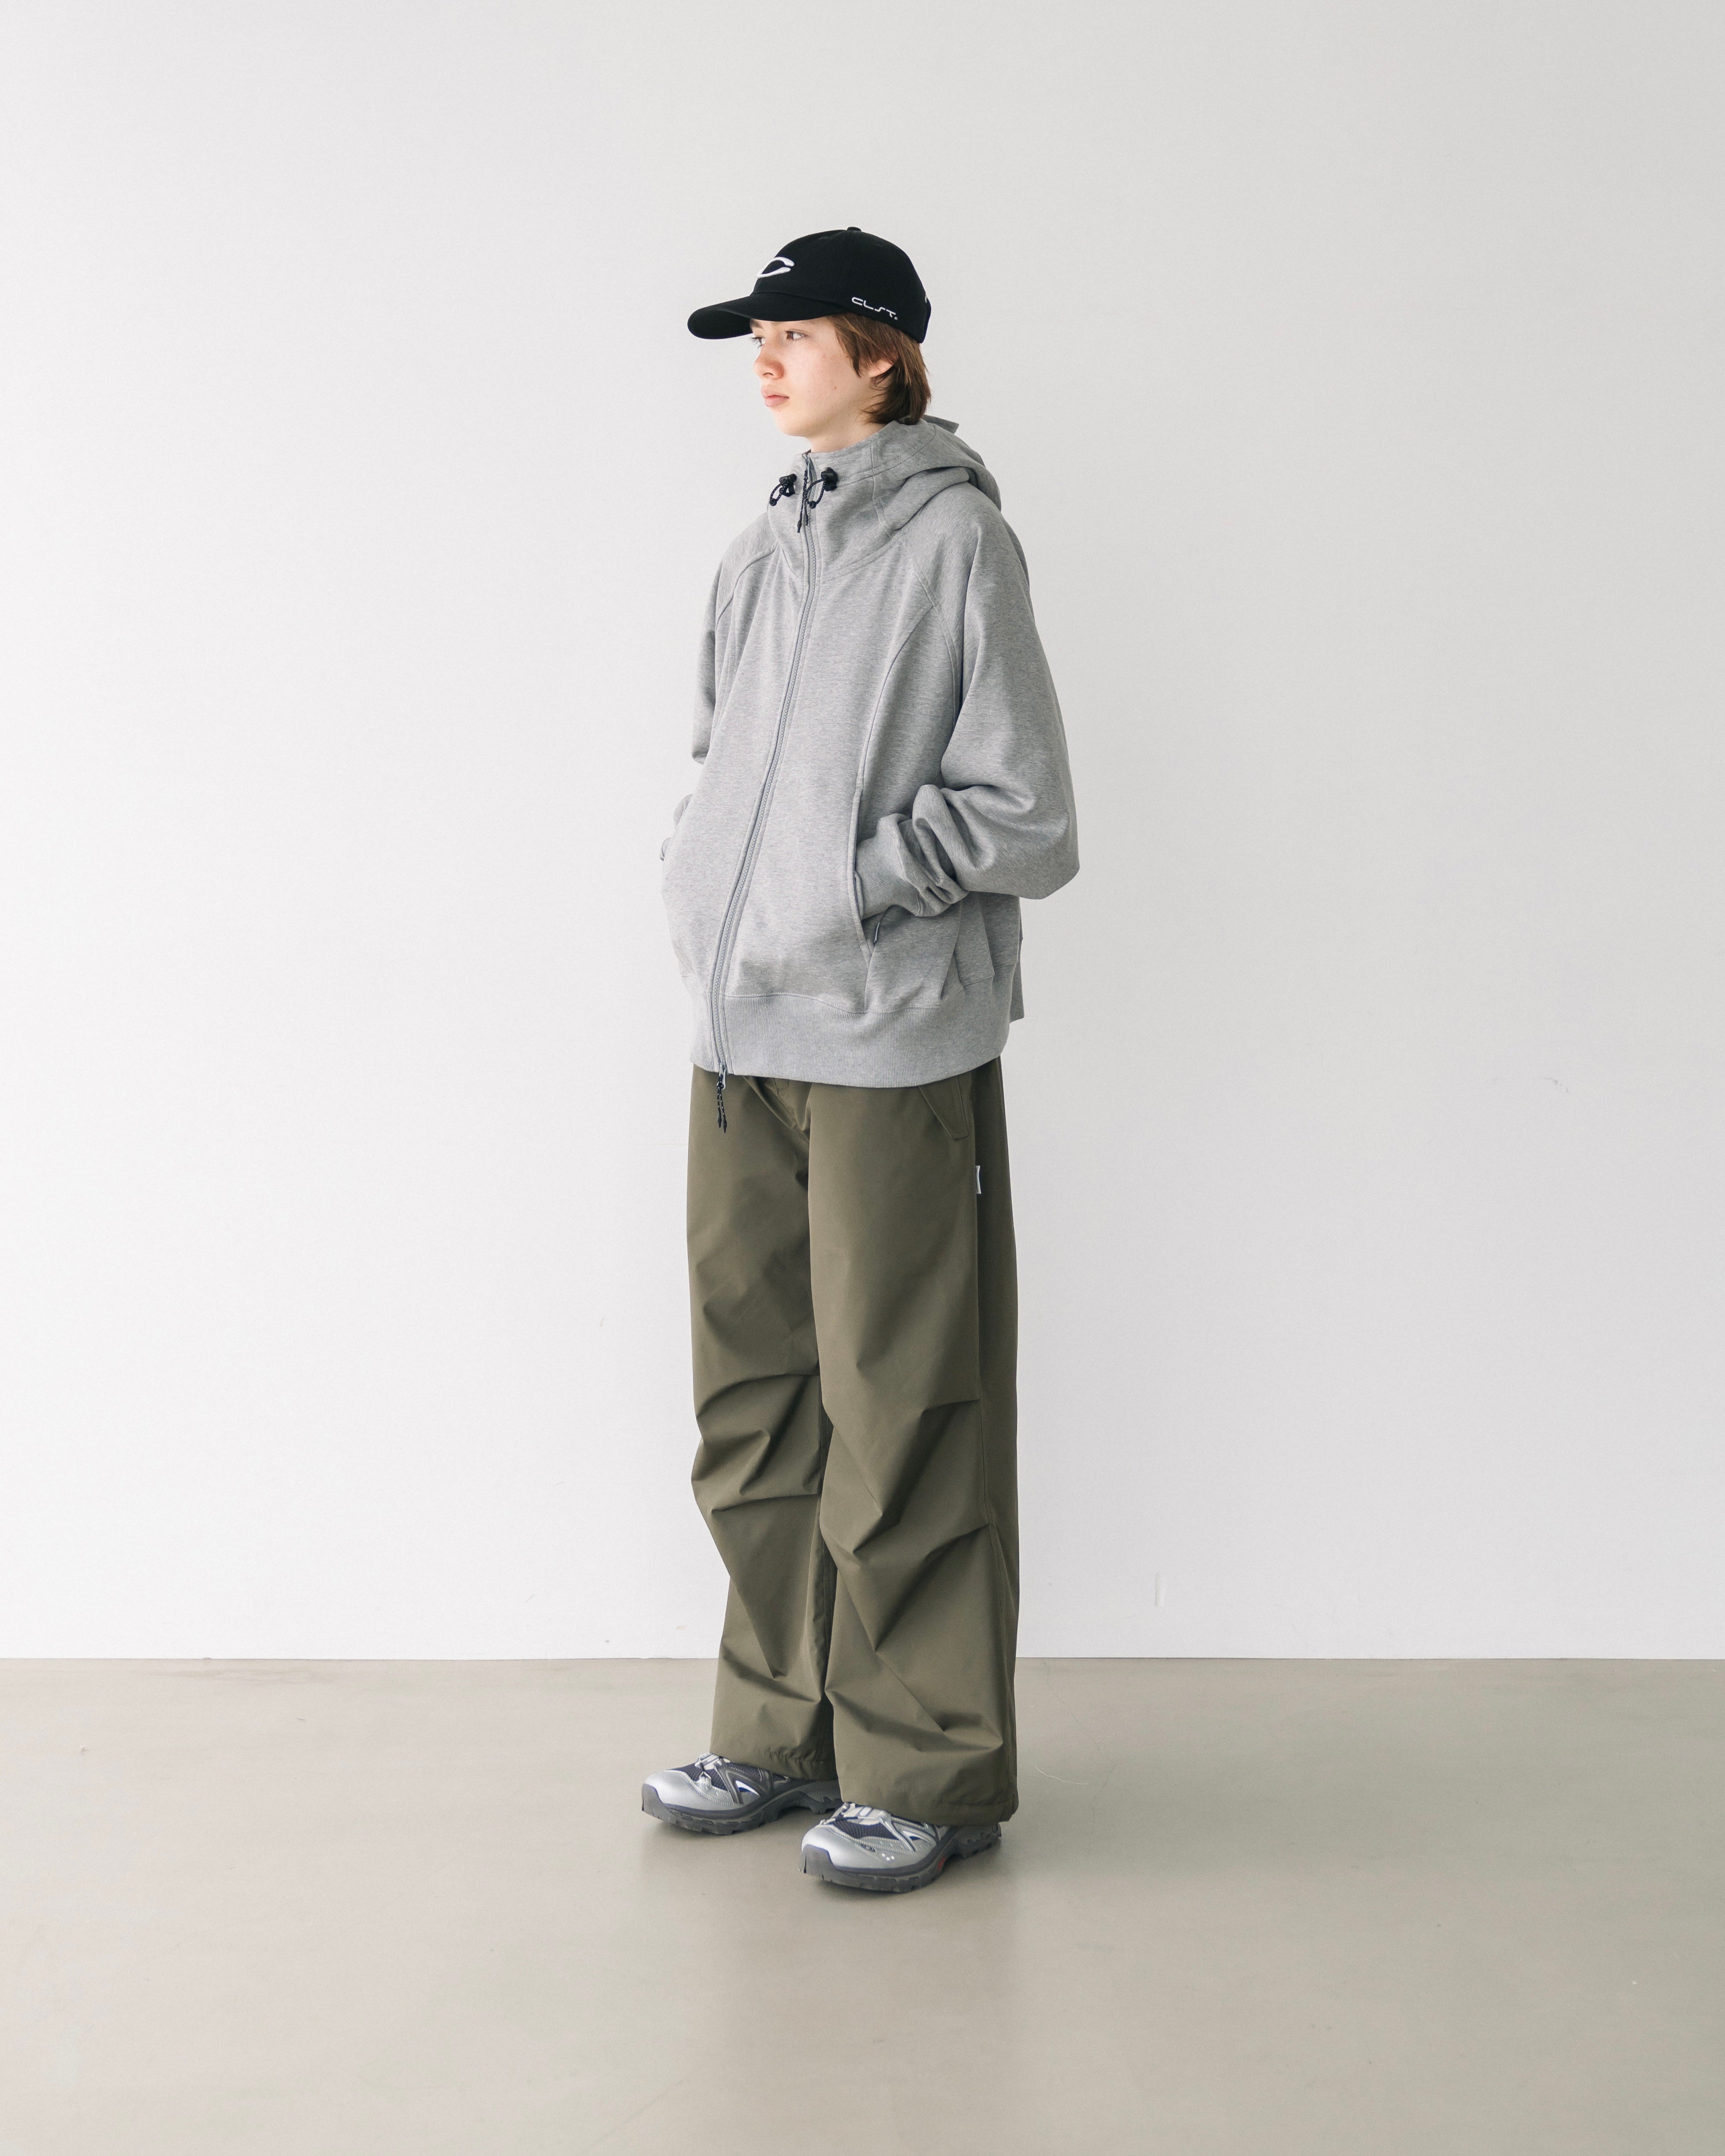 5.1 WED 20:00- In stock】+phenix WINDSTOPPER® by GORE-TEX LABS CITY OV